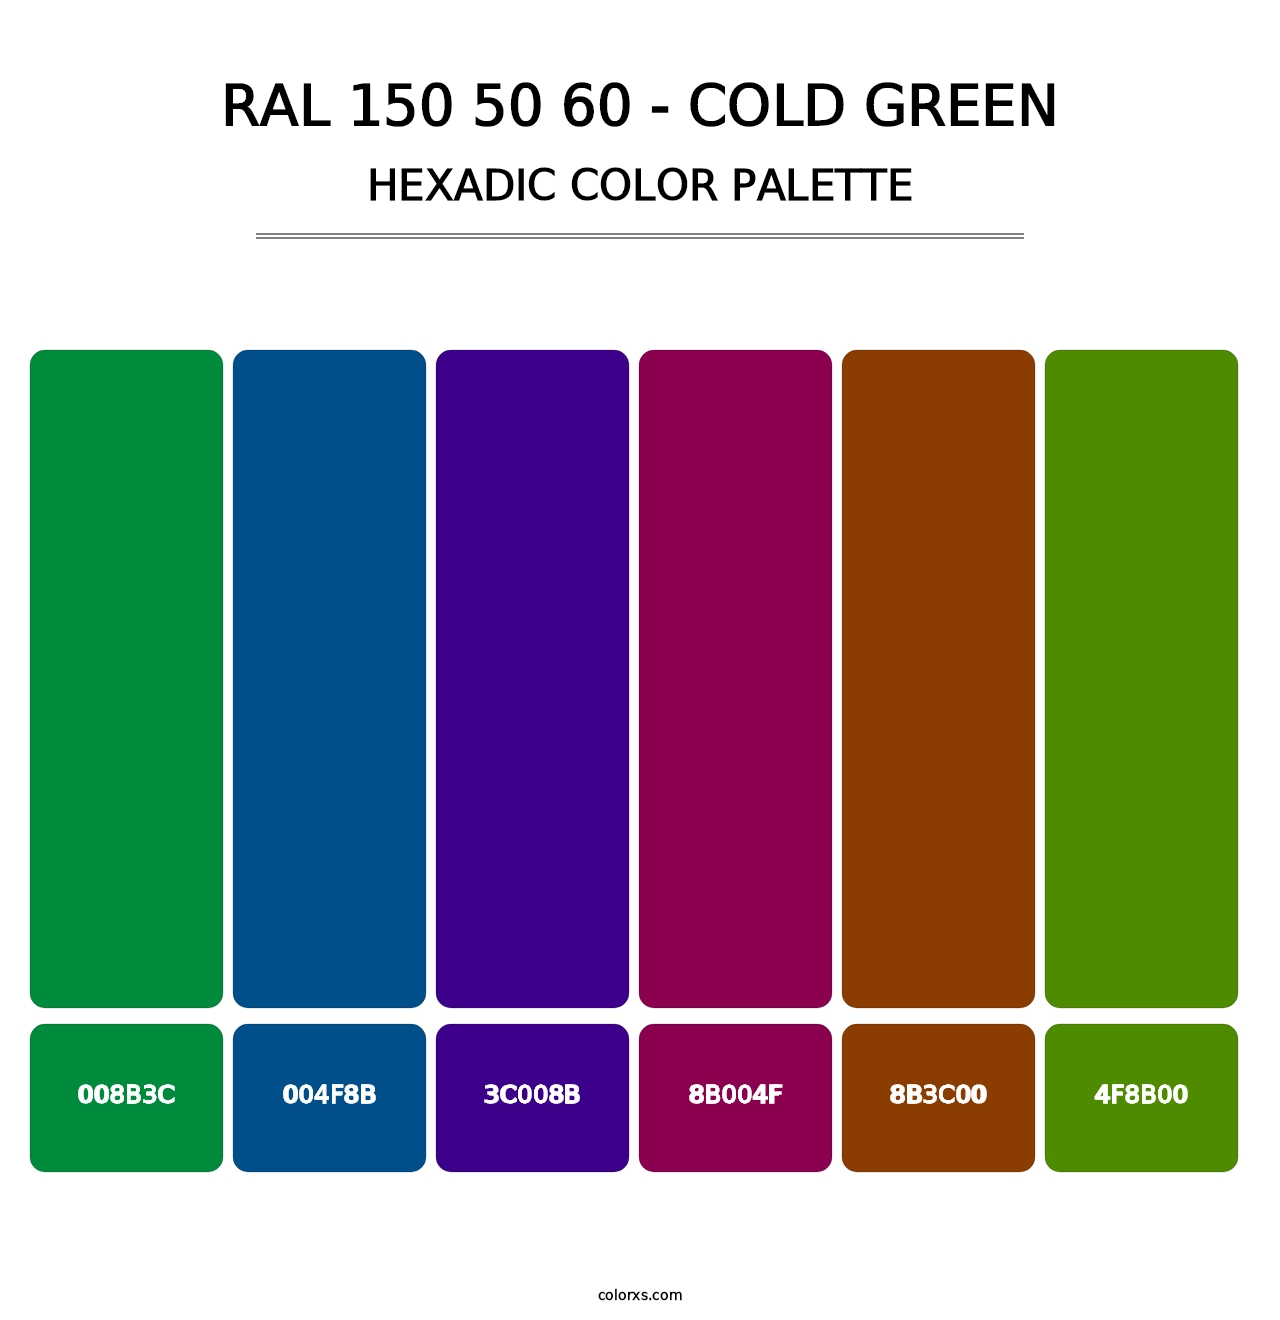 RAL 150 50 60 - Cold Green - Hexadic Color Palette